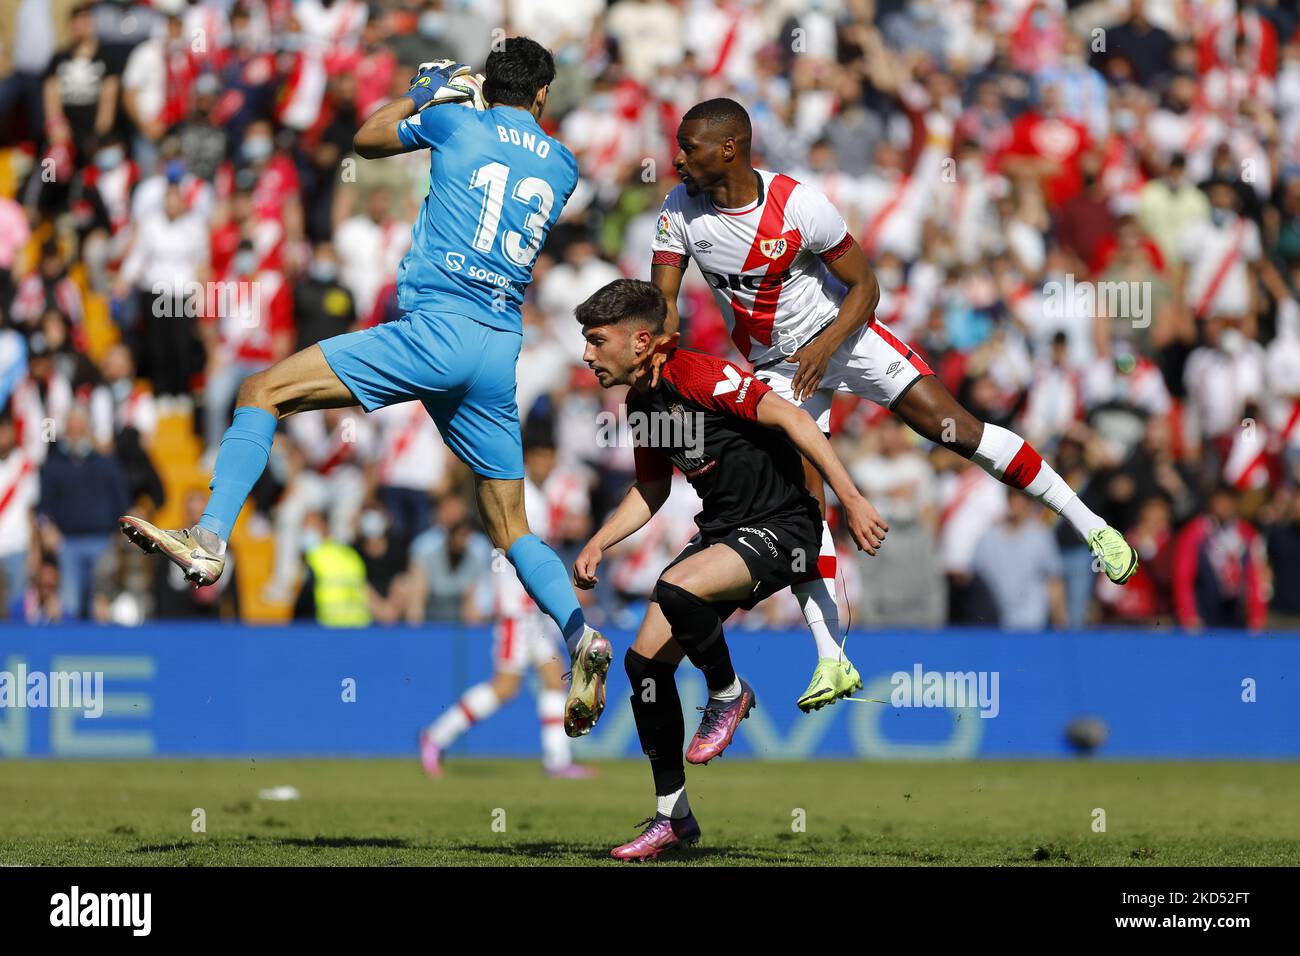 <s113< during the Liga match between Rayo Vallecano and Sevilla FC at Estadio de Vallecas in Barcelona, Spain. (Photo by DAX Images/NurPhoto) Stock Photo